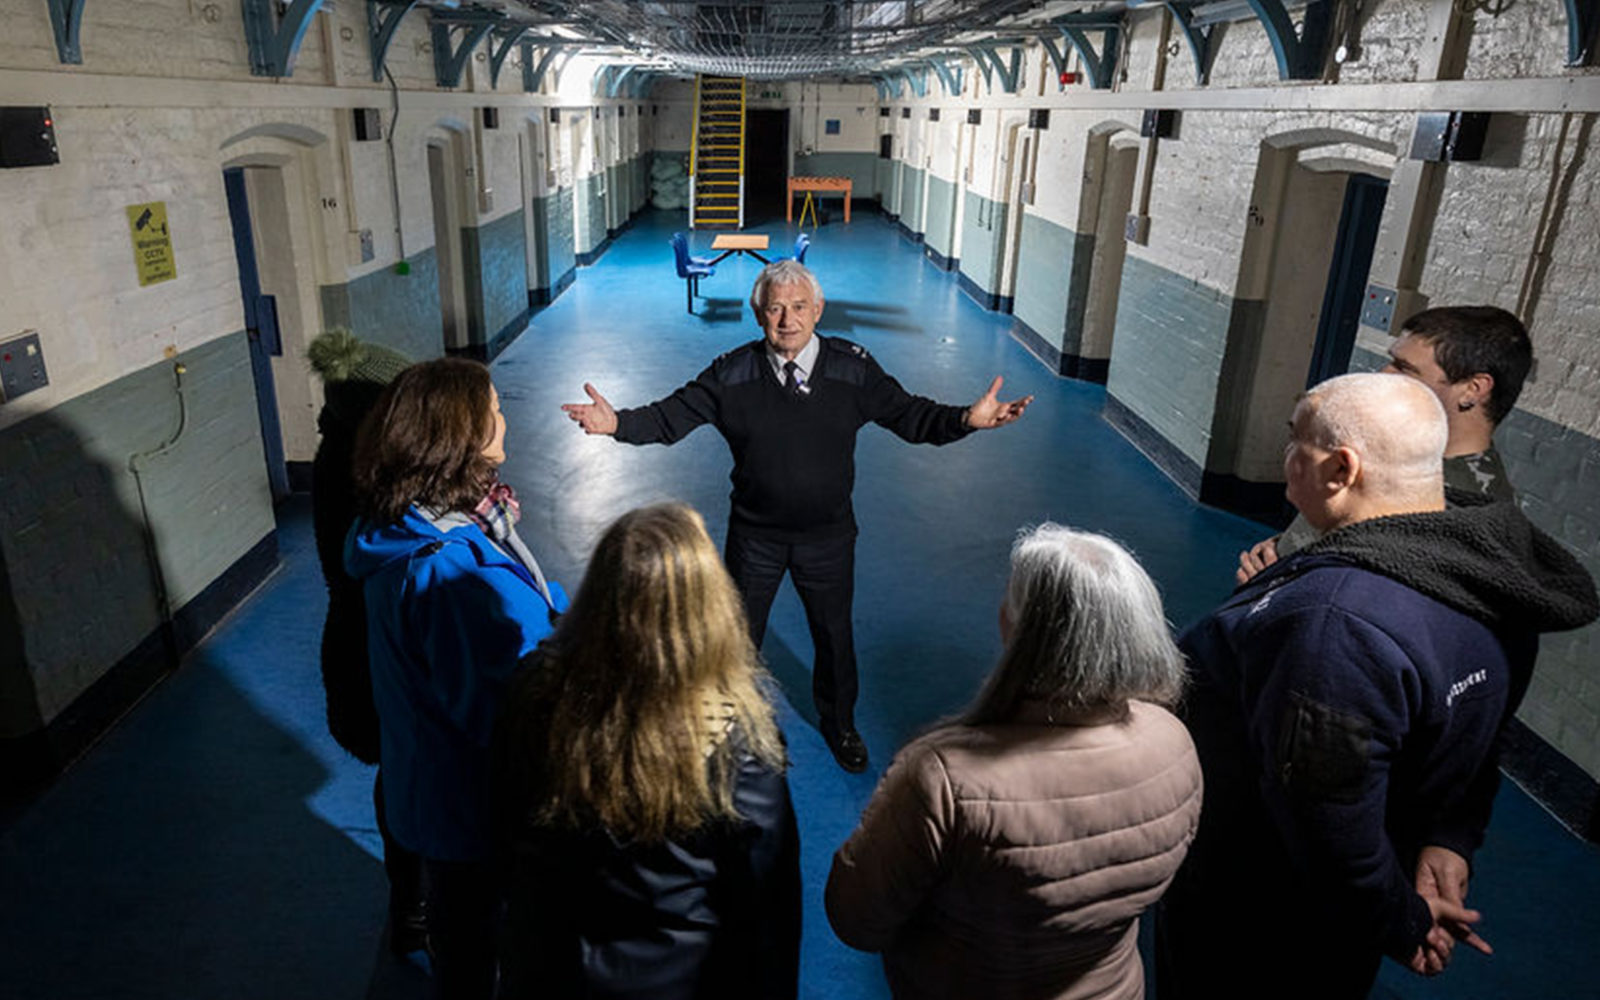 Spend the night in a real prison at Shrewsbury Prison